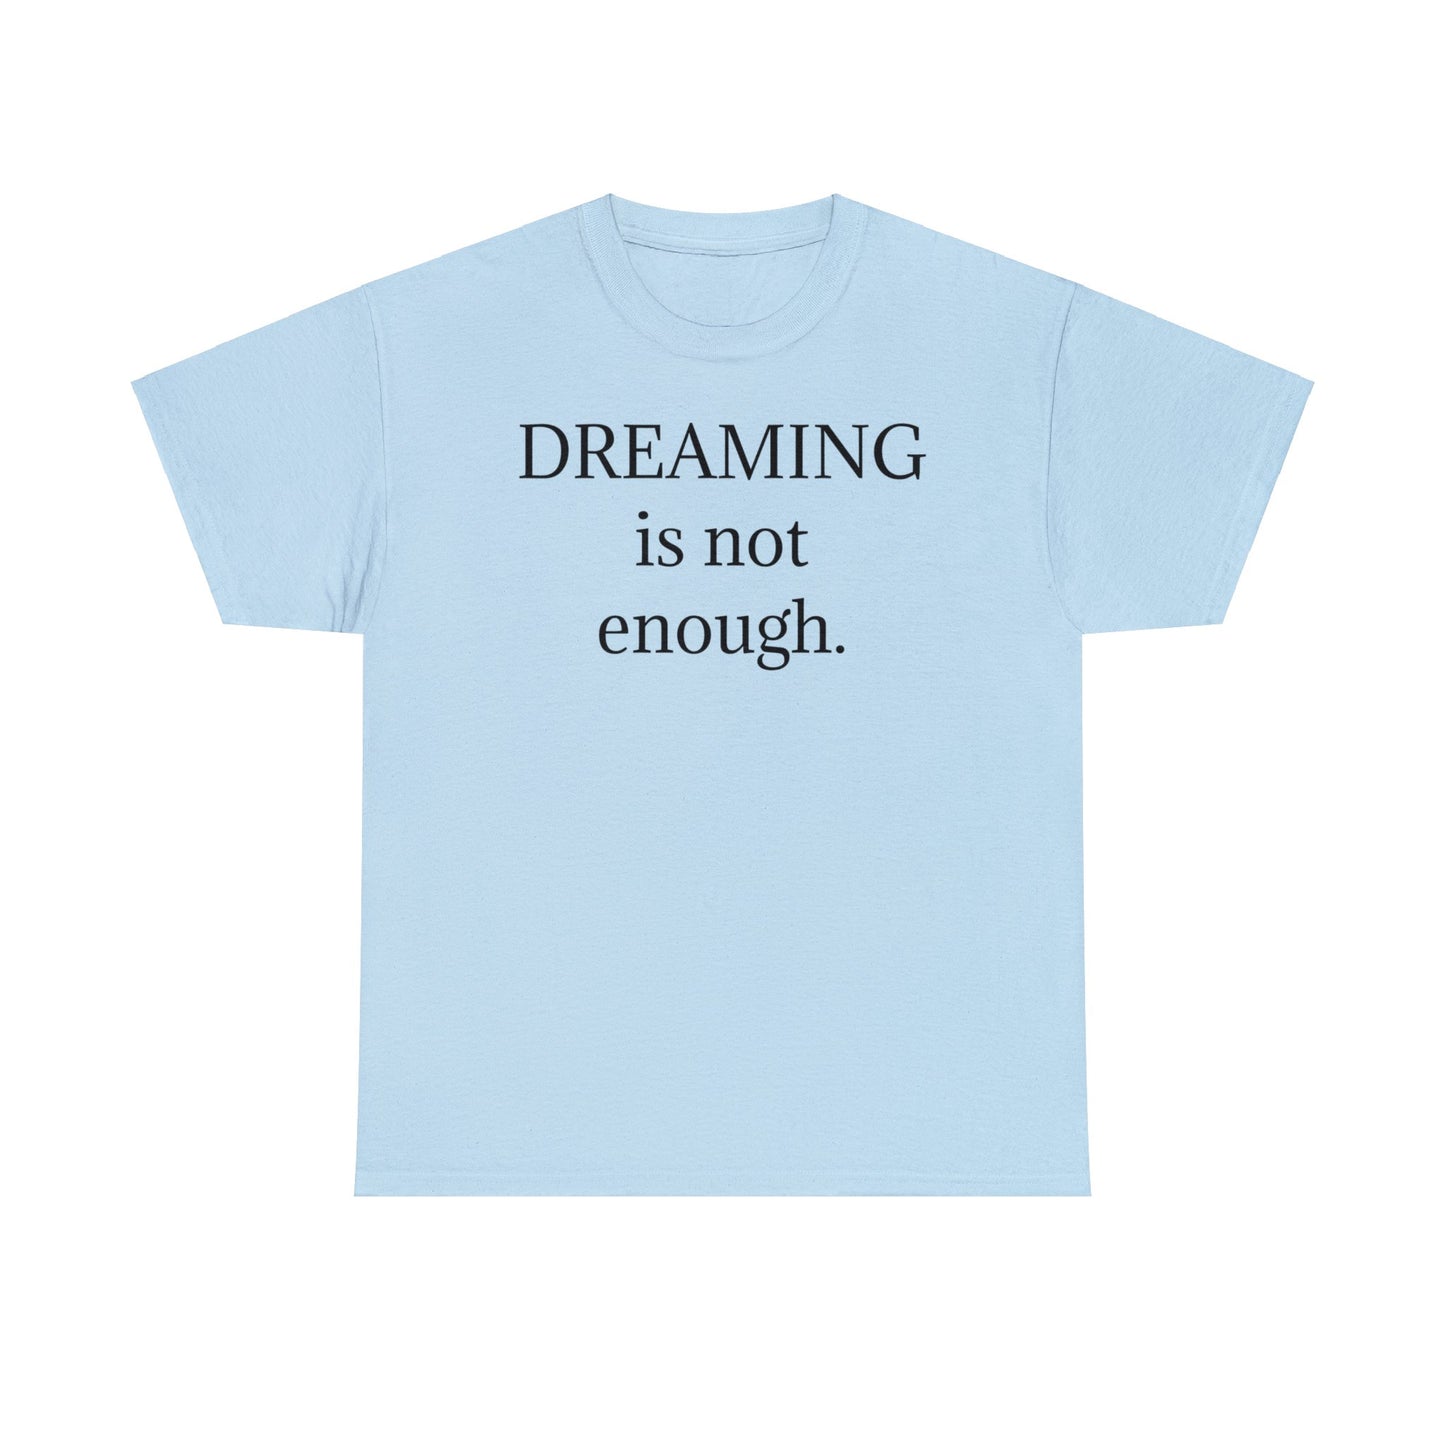 Dreaming is not enough t-shirt